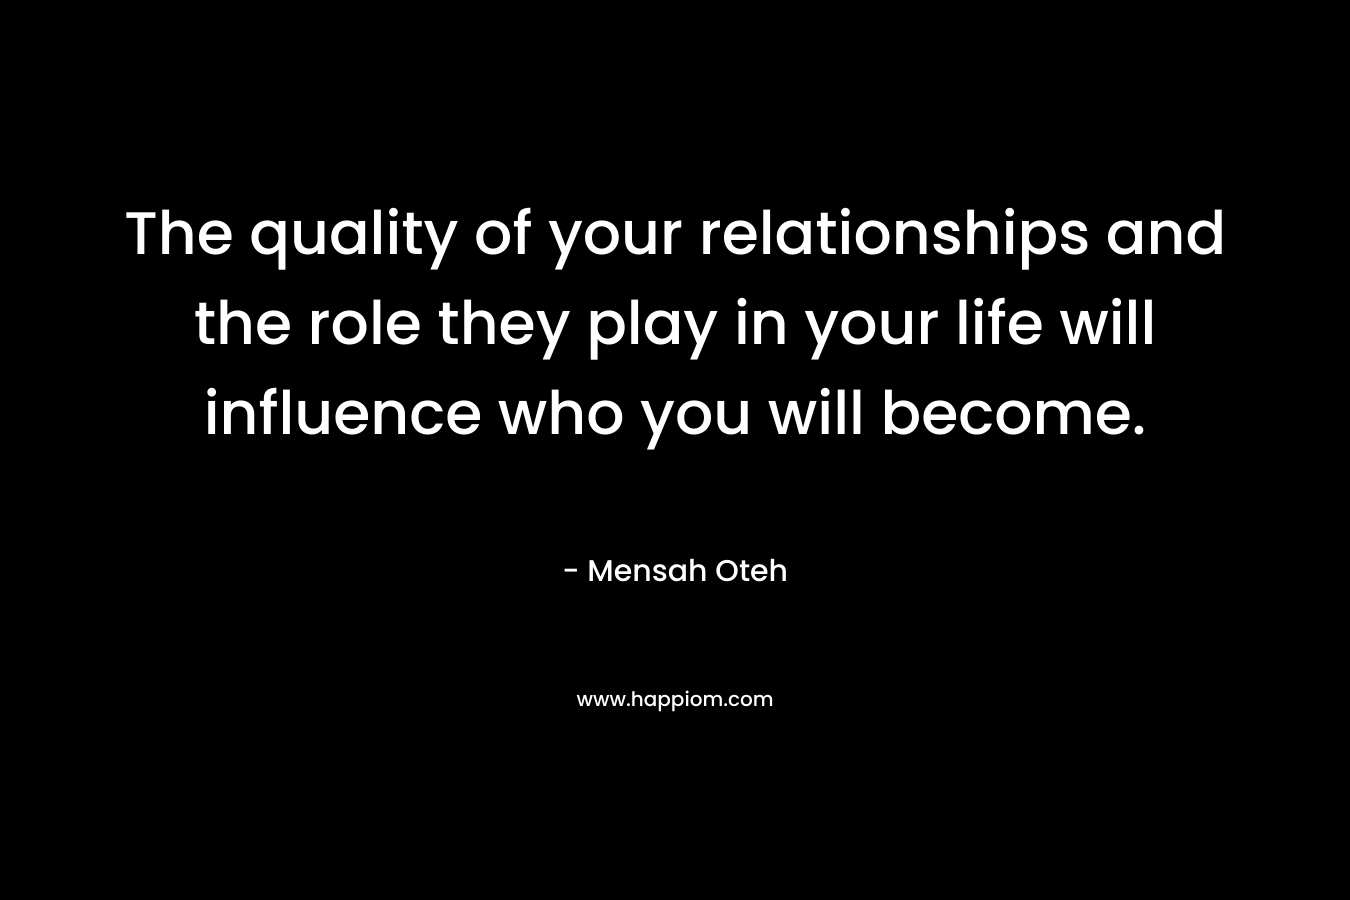 The quality of your relationships and the role they play in your life will influence who you will become.